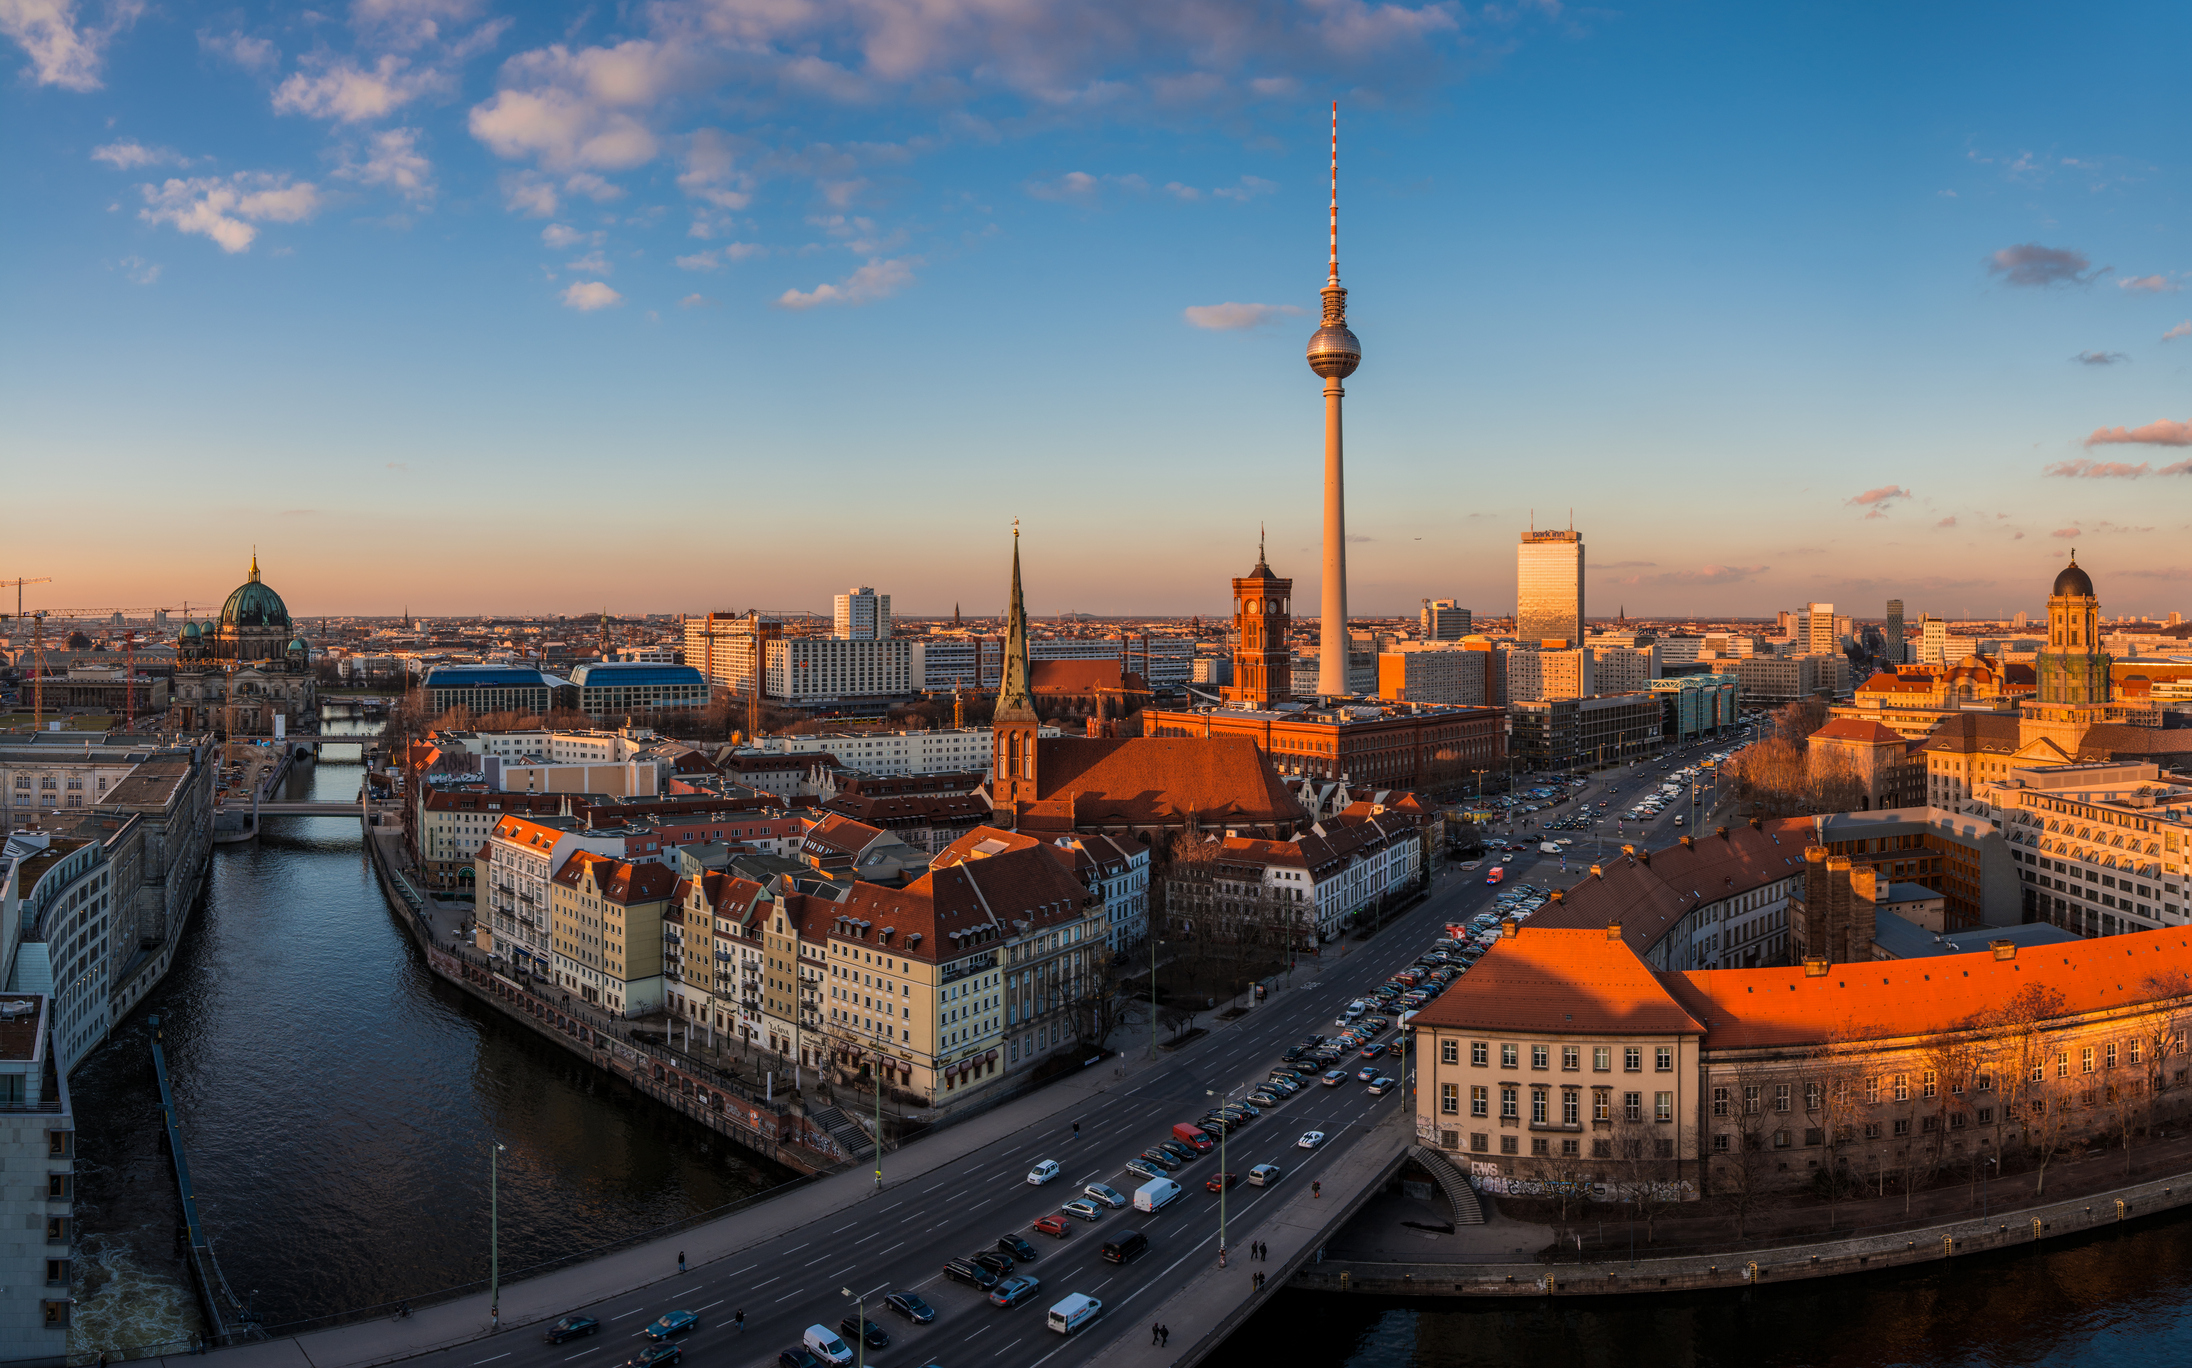 Startup Battlefield applications for Disrupt Berlin close this Monday